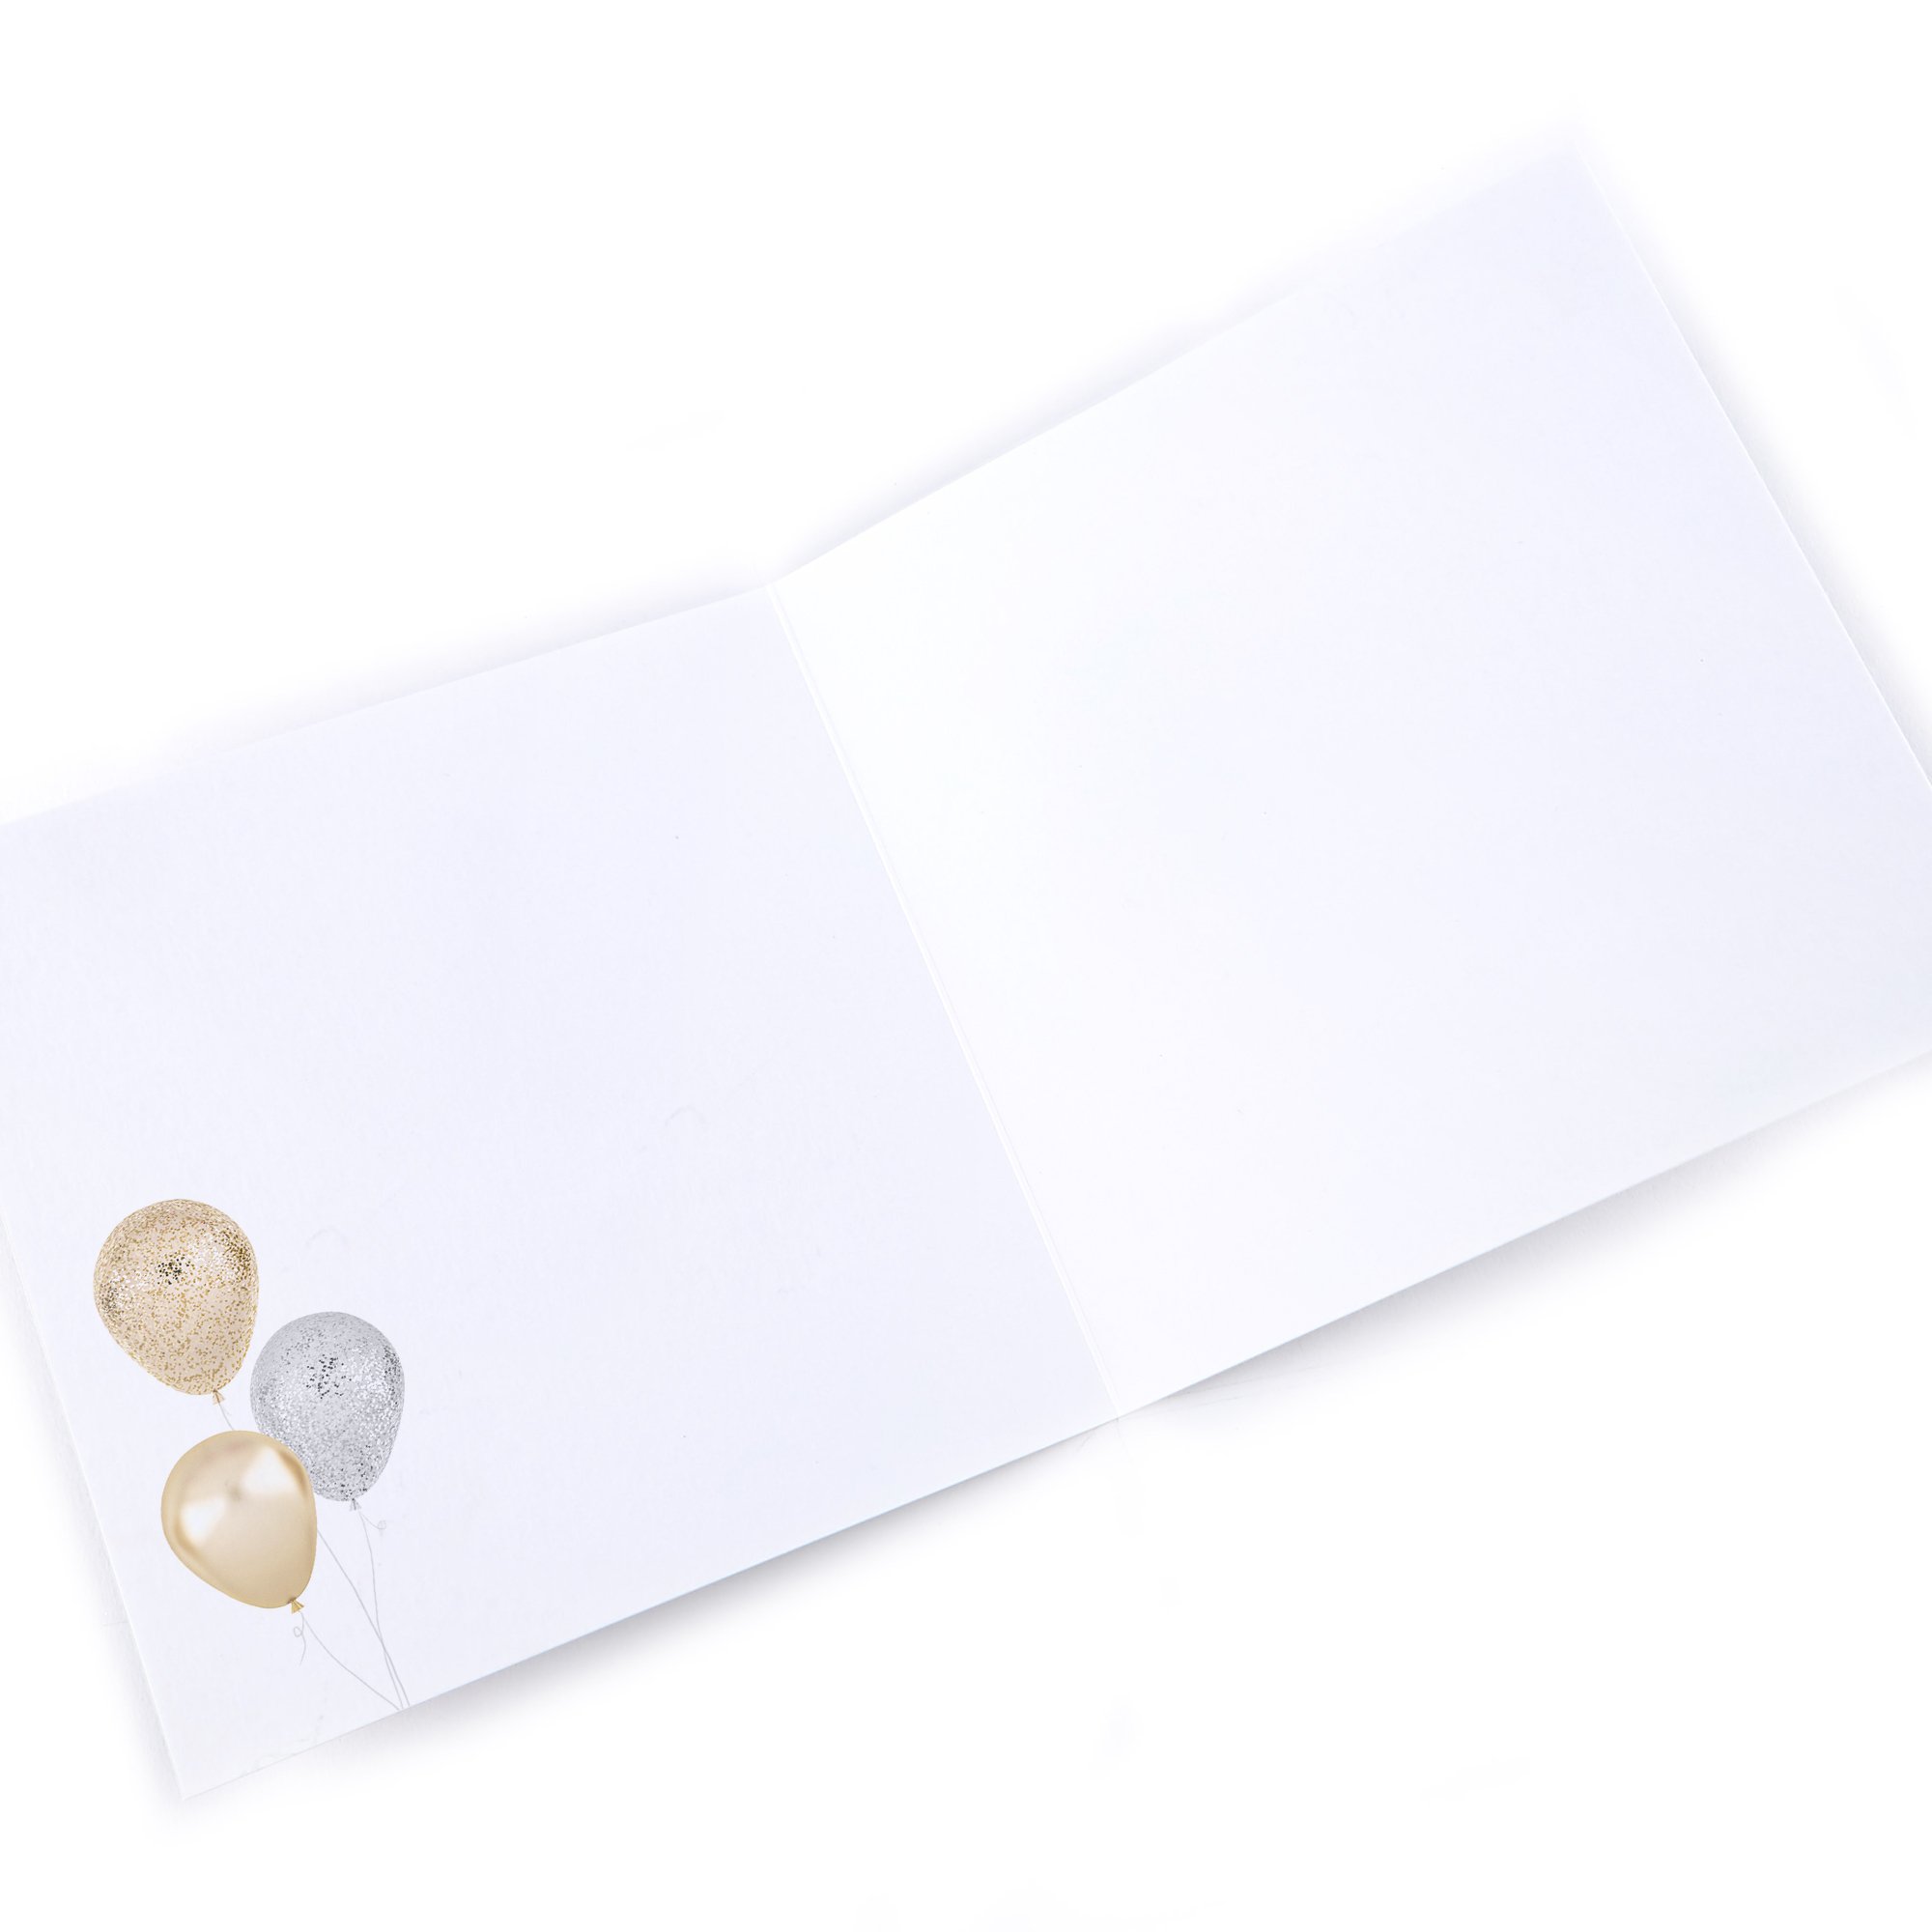 Personalised Congratulations Card - Gold & Silver Balloons